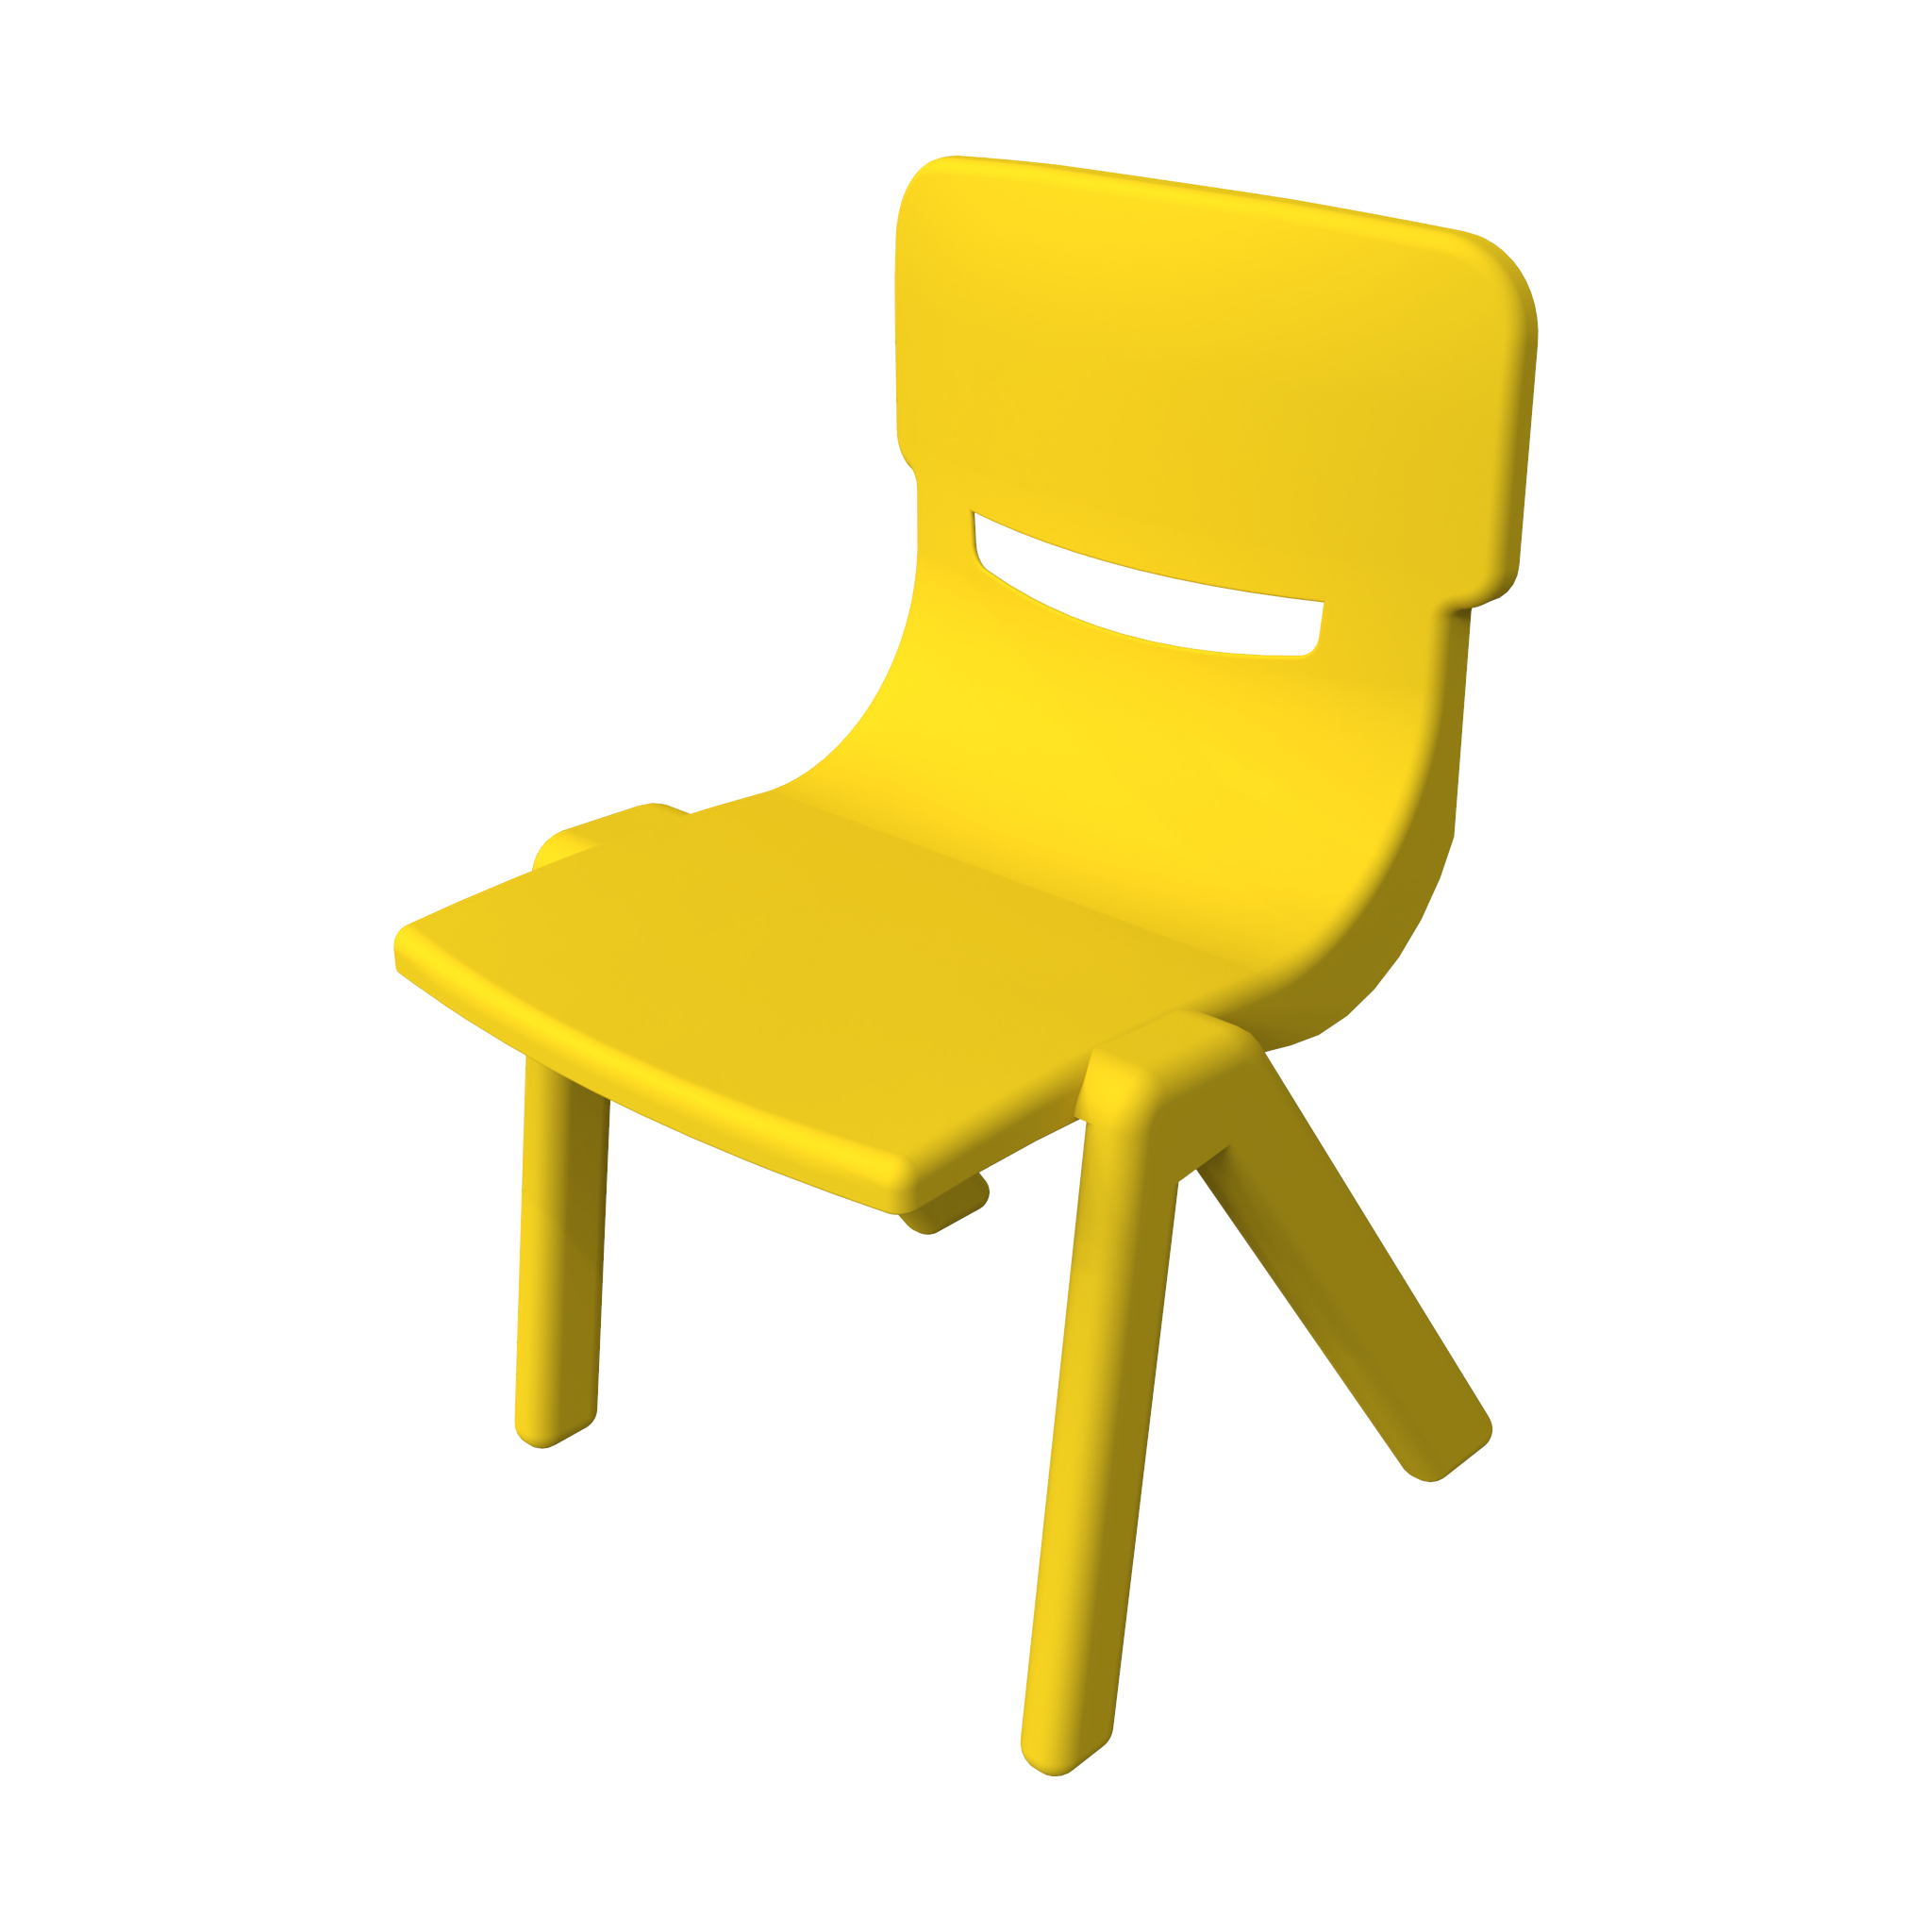 This image shows an Kids furniture Fun chair yellow